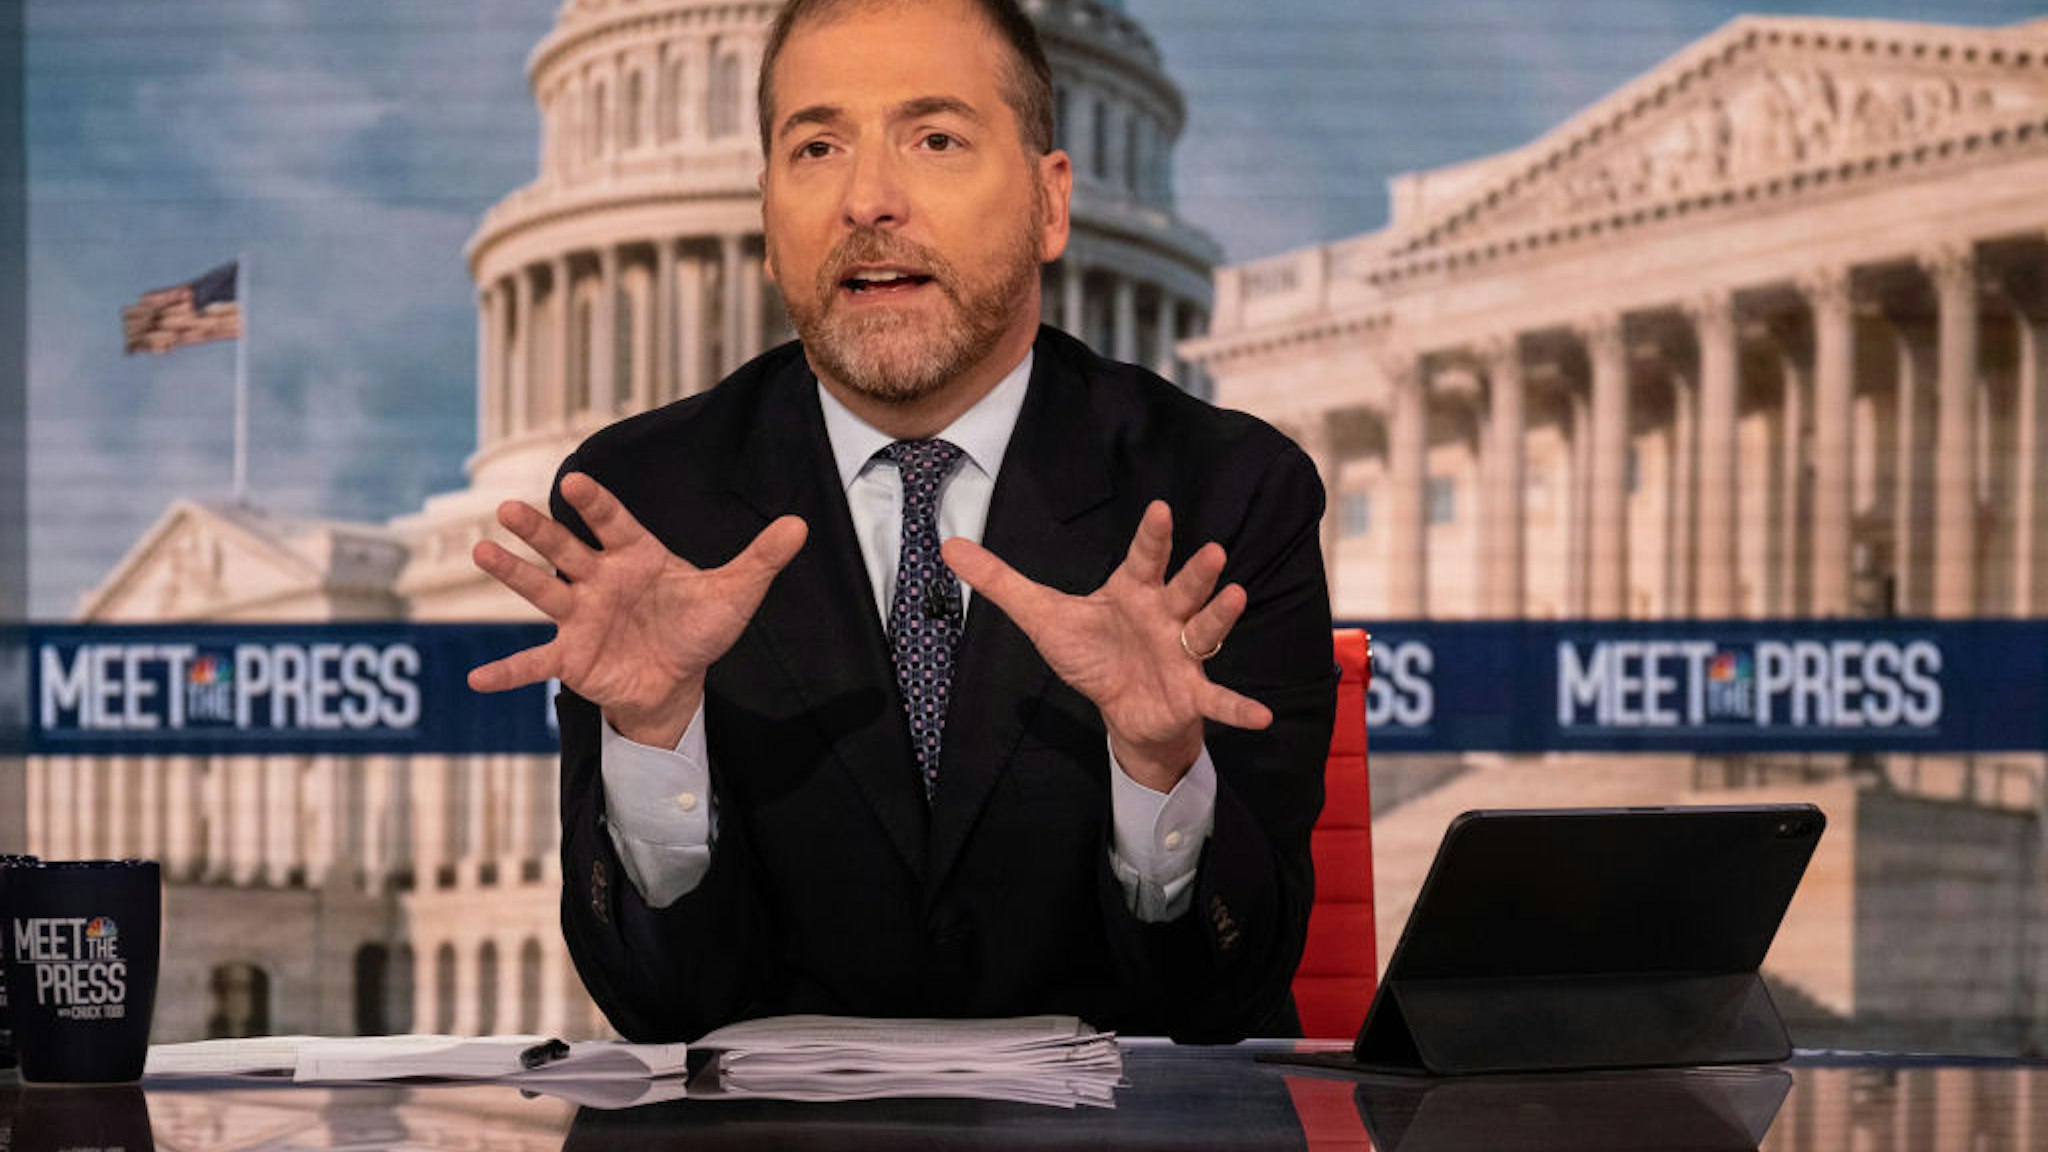 MEET THE PRESS -- Pictured: (l-r) Moderator Chuck Todd appears on Meet the Press" in Washington, D.C., Sunday, September 26, 2021. (Photo by: William B. Plowman/NBC NewsWire via Getty Images/NBCU Photo Bank via Getty Images)